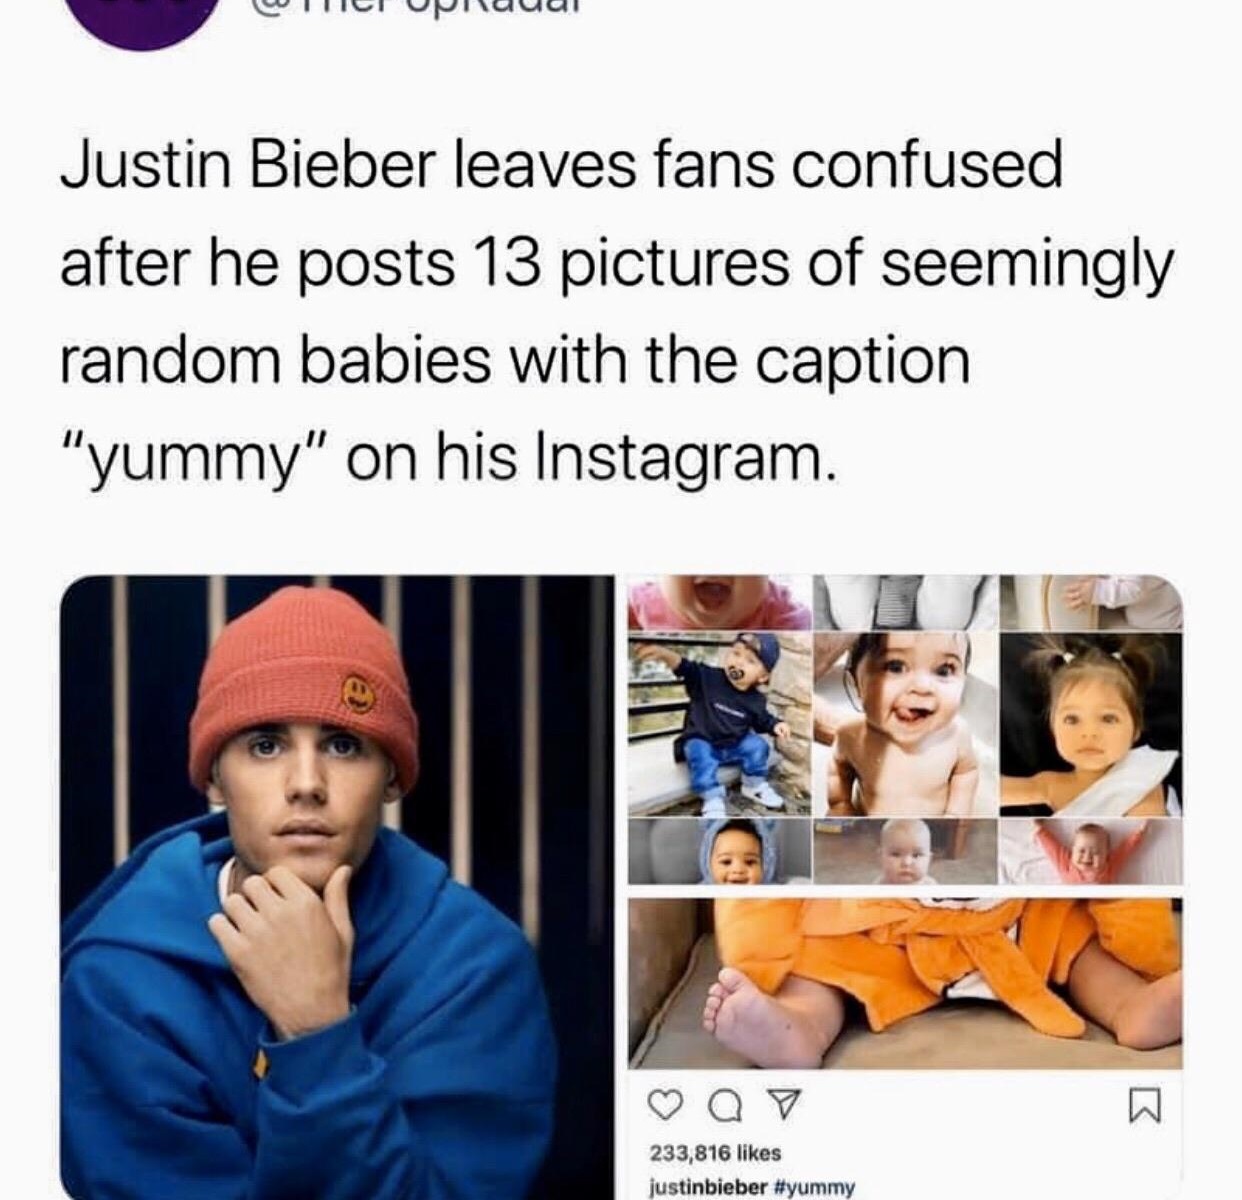 human behavior - C Ci Opulaual Justin Bieber leaves fans confused after he posts 13 pictures of seemingly random babies with the caption "yummy" on his Instagram. Q7 233,816 justinbieber